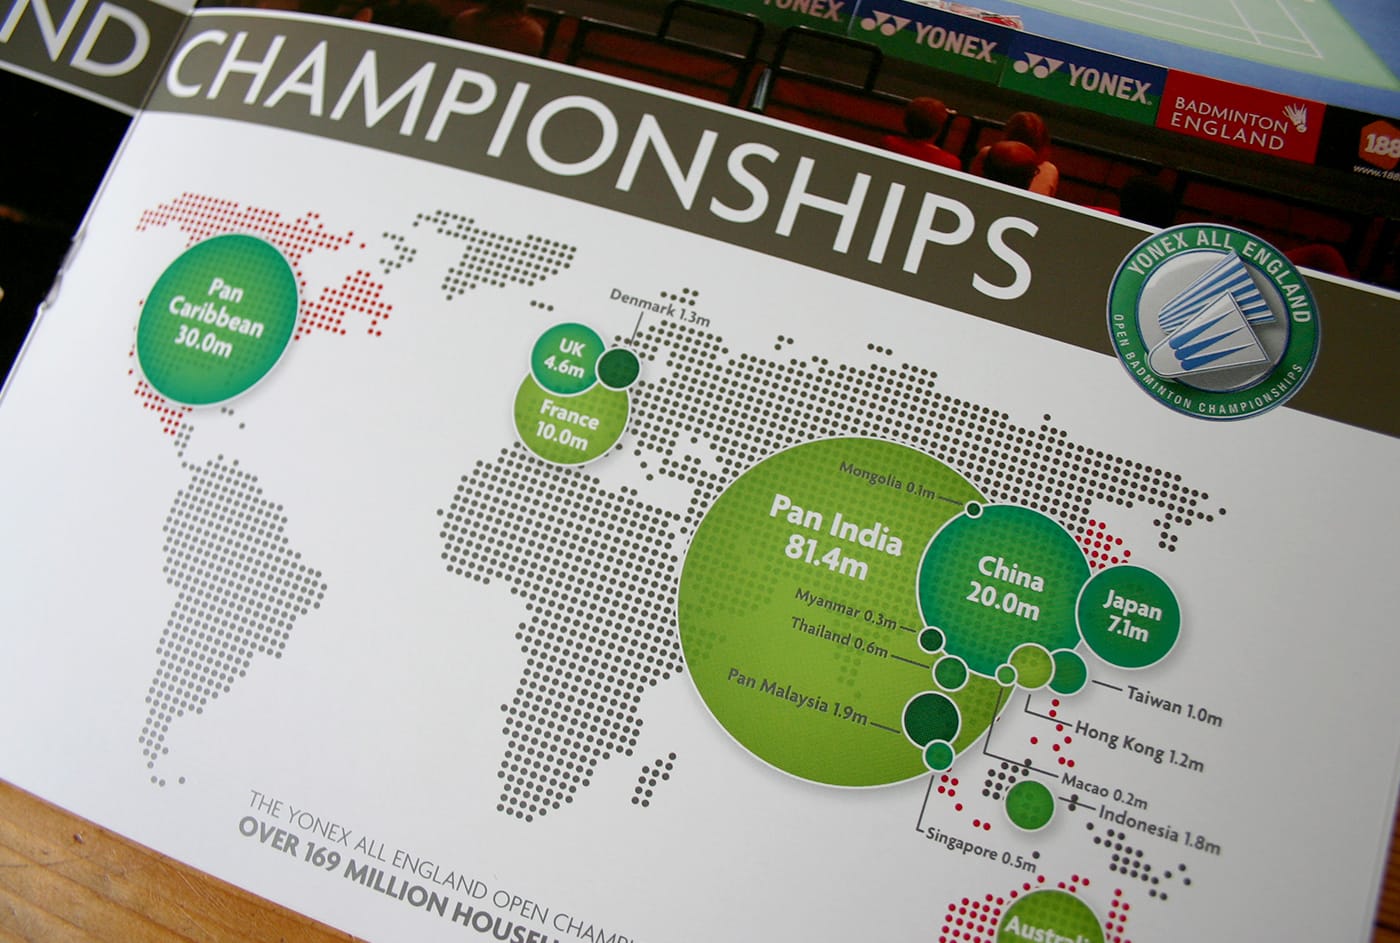 Creation of infographics on behalf of a sports national governing body.